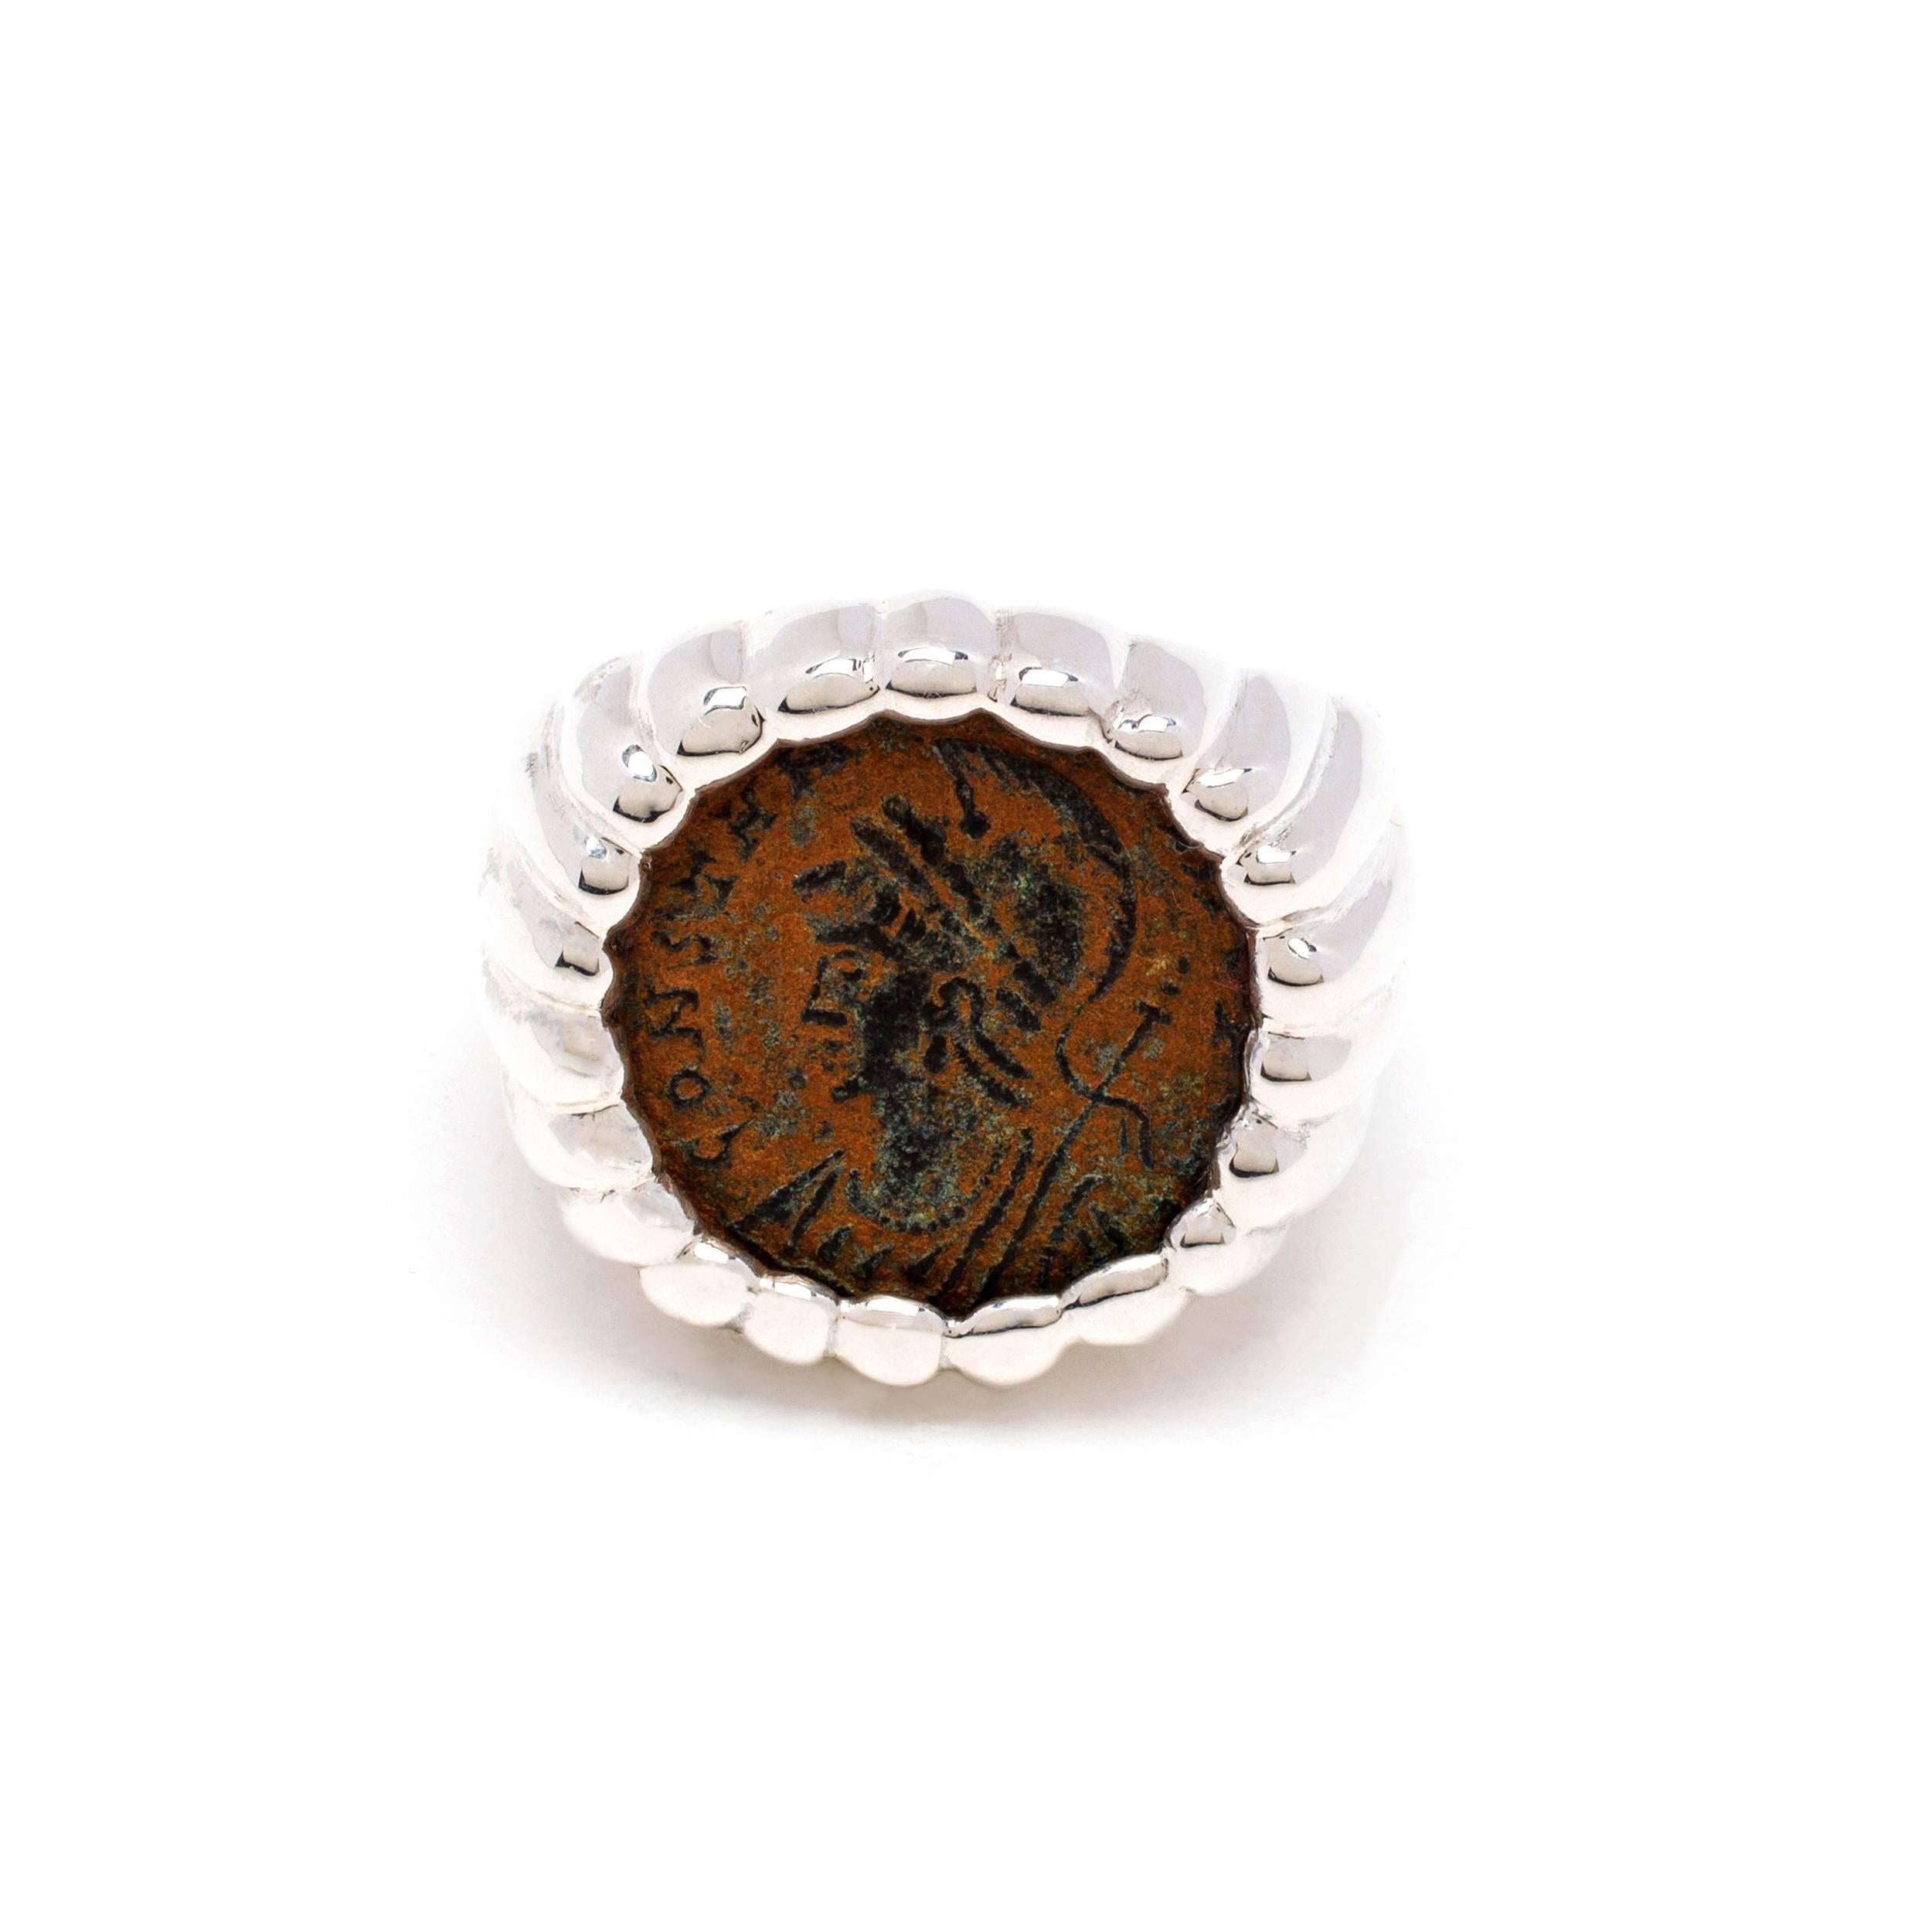 This DUBINI coin ring from the 'Empires' collection features an authentic Roman Imperial bronze coin set in sterling silver.

The ring may be ordered in any size with a lead time of 3-4 weeks.

* Due to the unique process of hand carving coins in